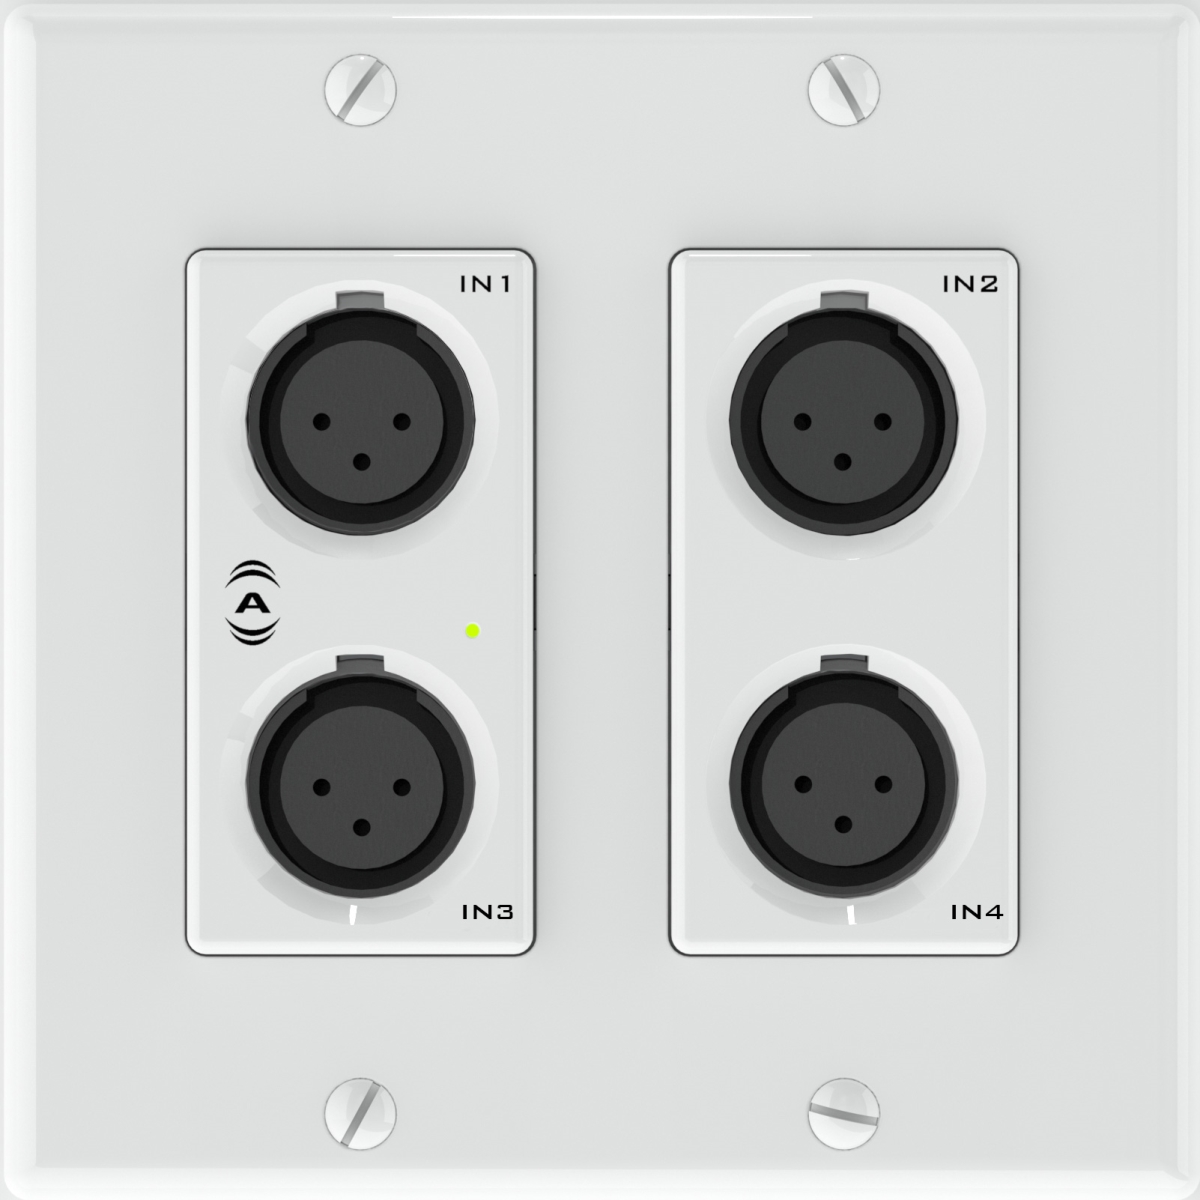 Attero Tech Atec-undx4i-u 4 Mic & Line In Xlr 4x2 Channel 2 Gang Us Wall Plate With Phoenix Input & Output, Poe - White & Black Inserts